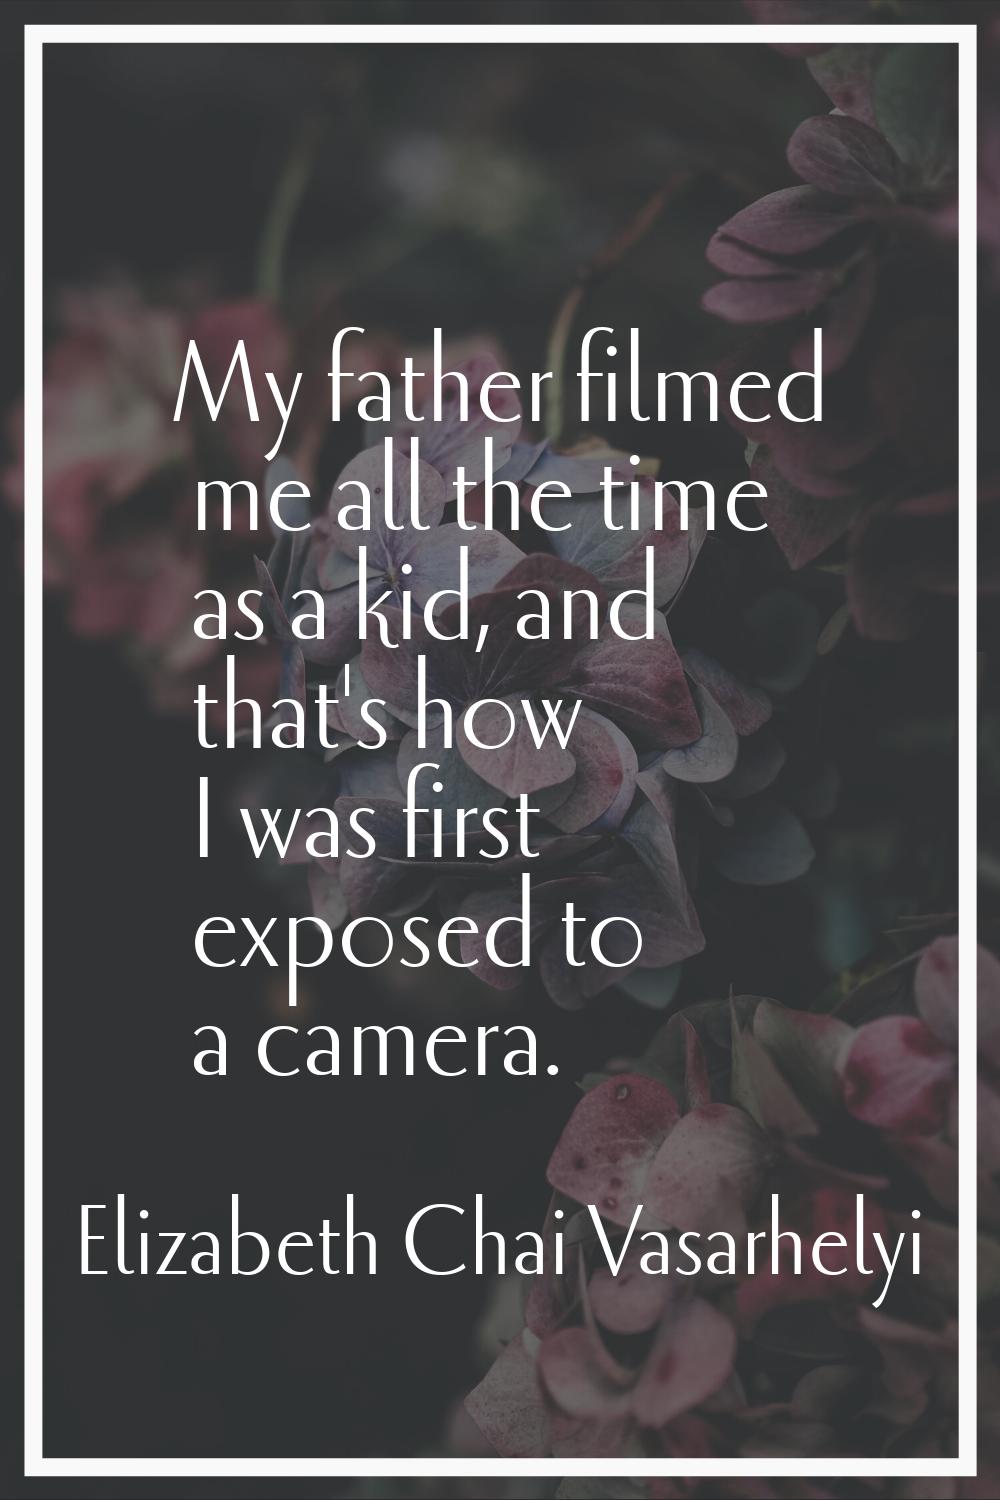 My father filmed me all the time as a kid, and that's how I was first exposed to a camera.